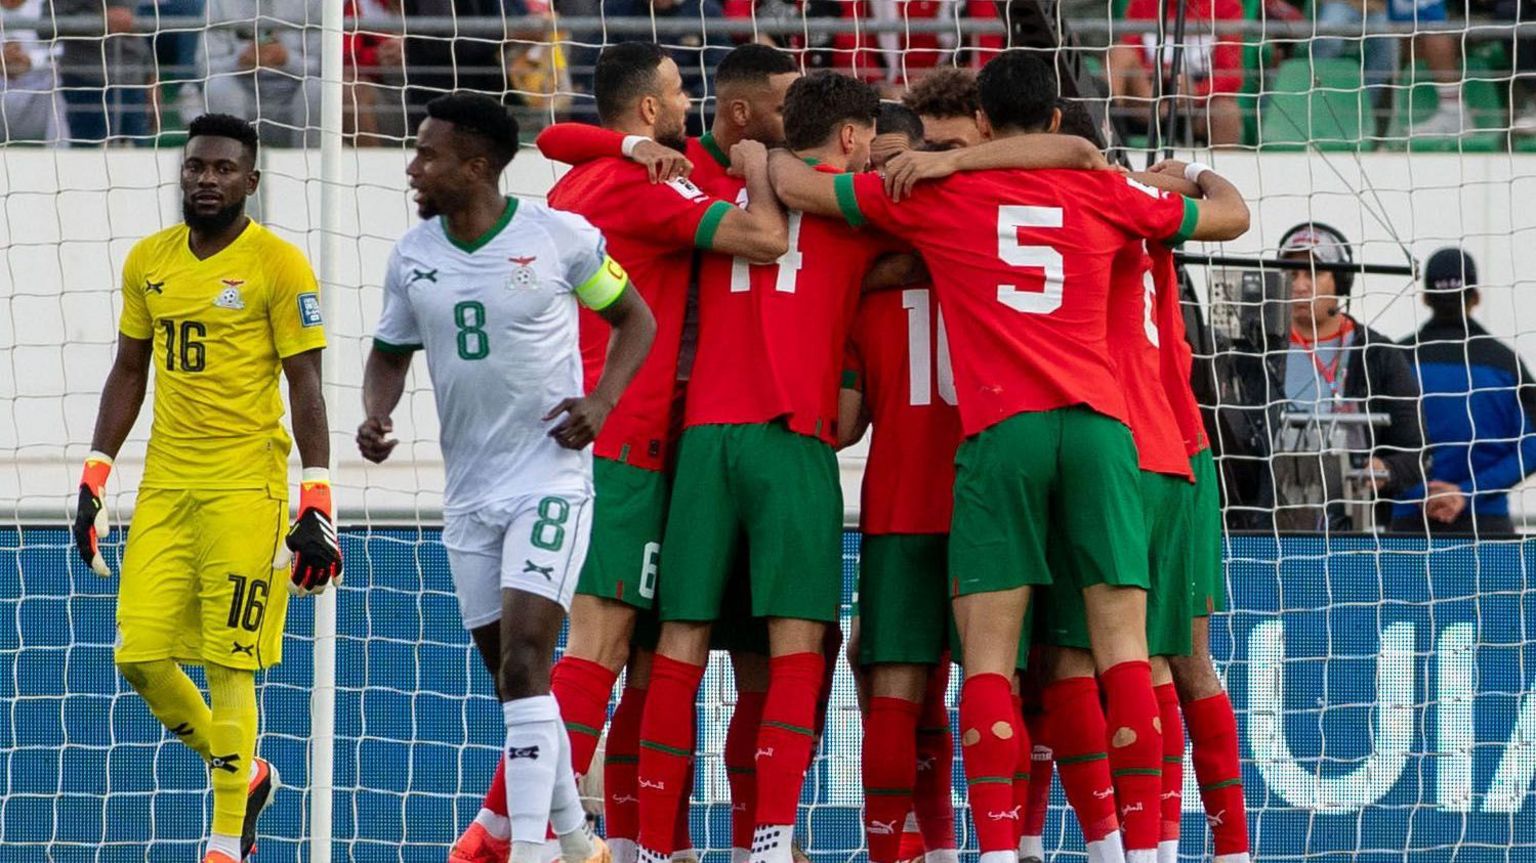 Moroccan players form a huddle as they celebrate a goal against Zambia